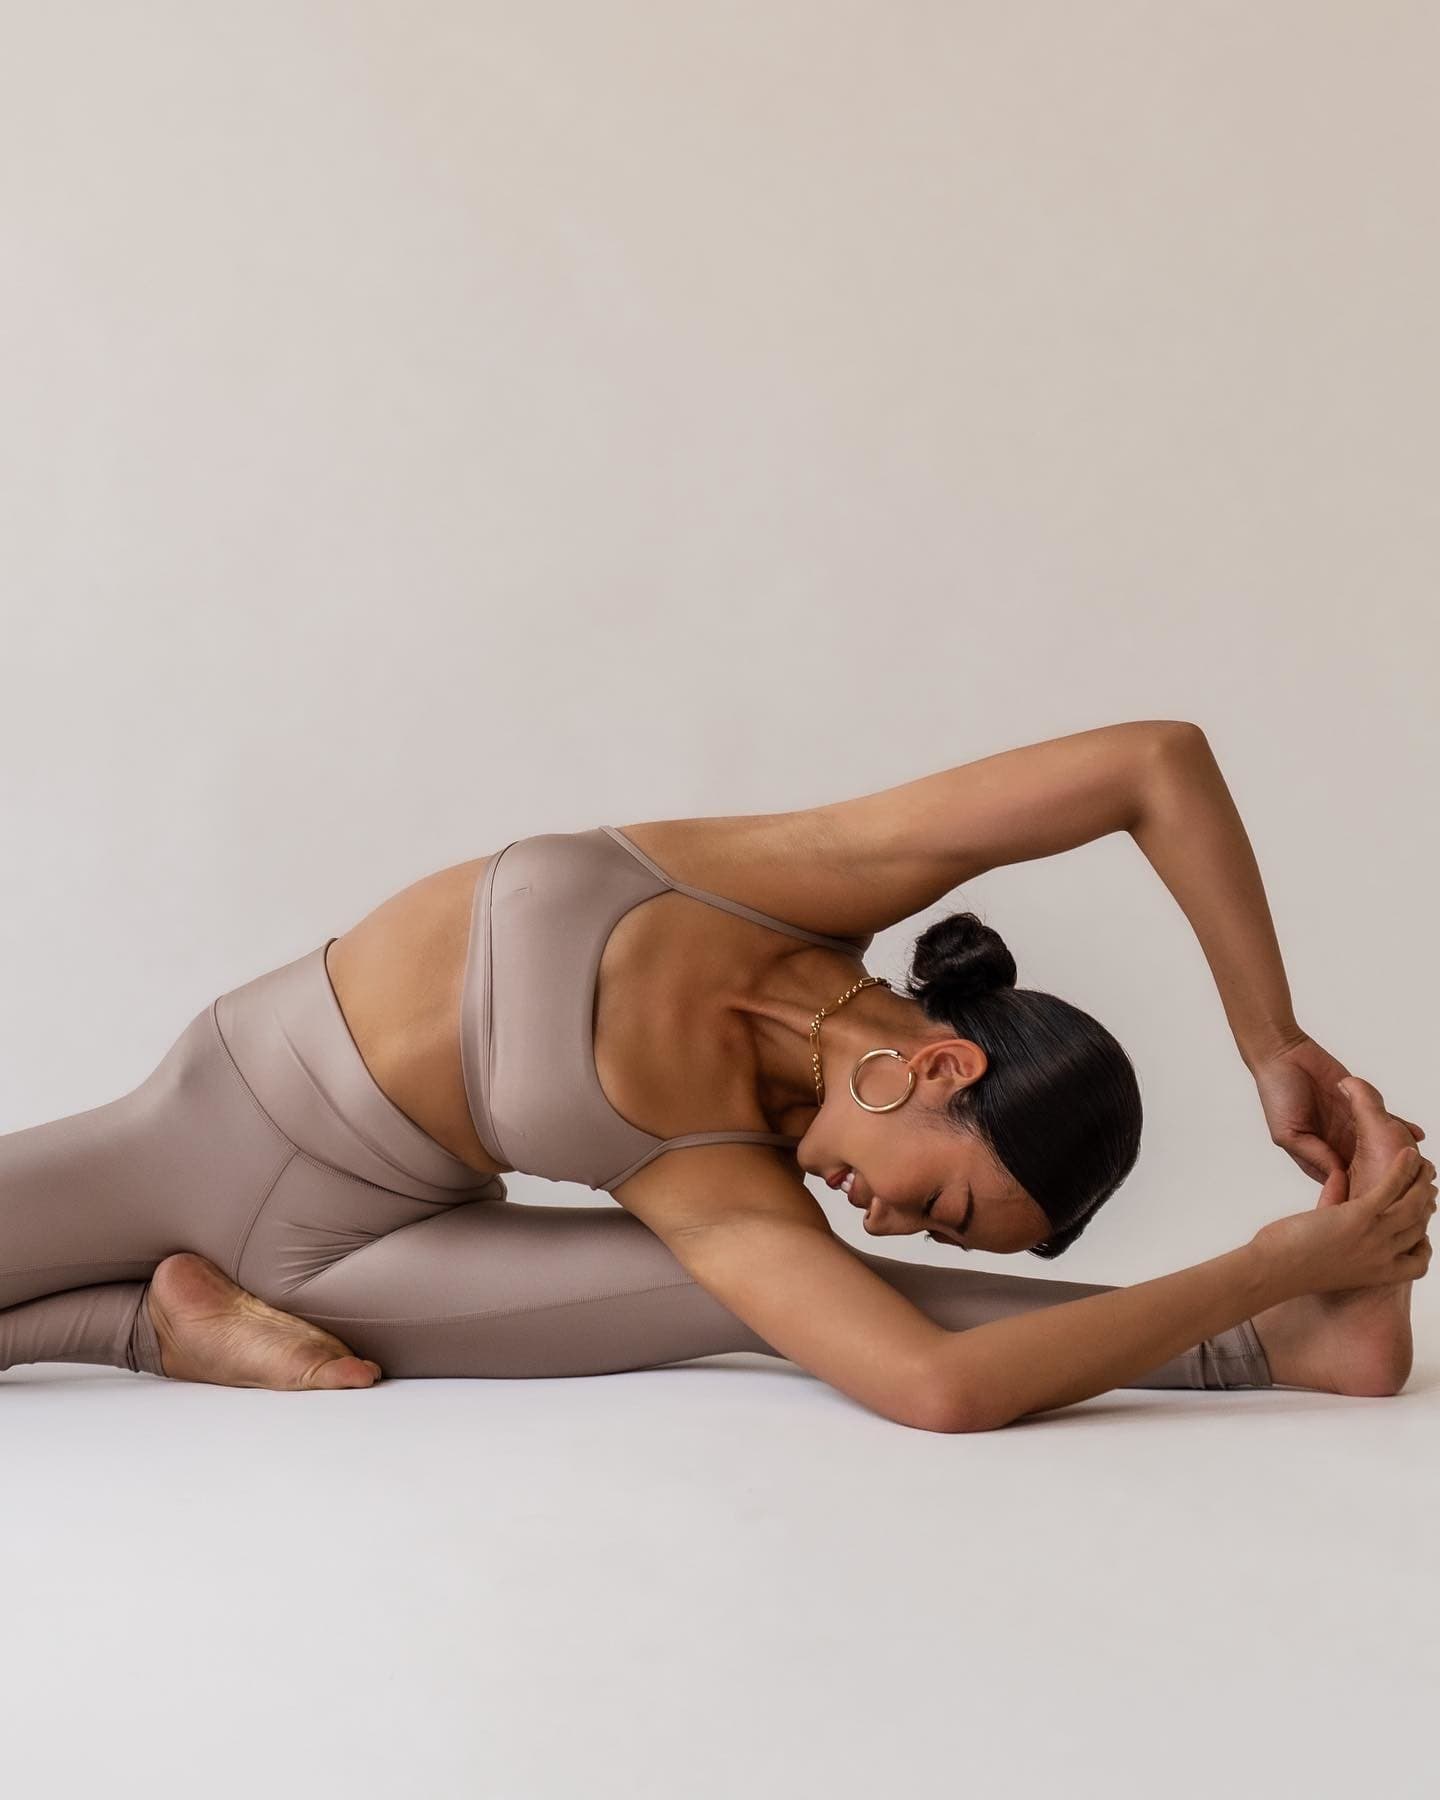 @yogibeachhouse wearing a matching workout set while stretching in front of a light taupe-colored background.  